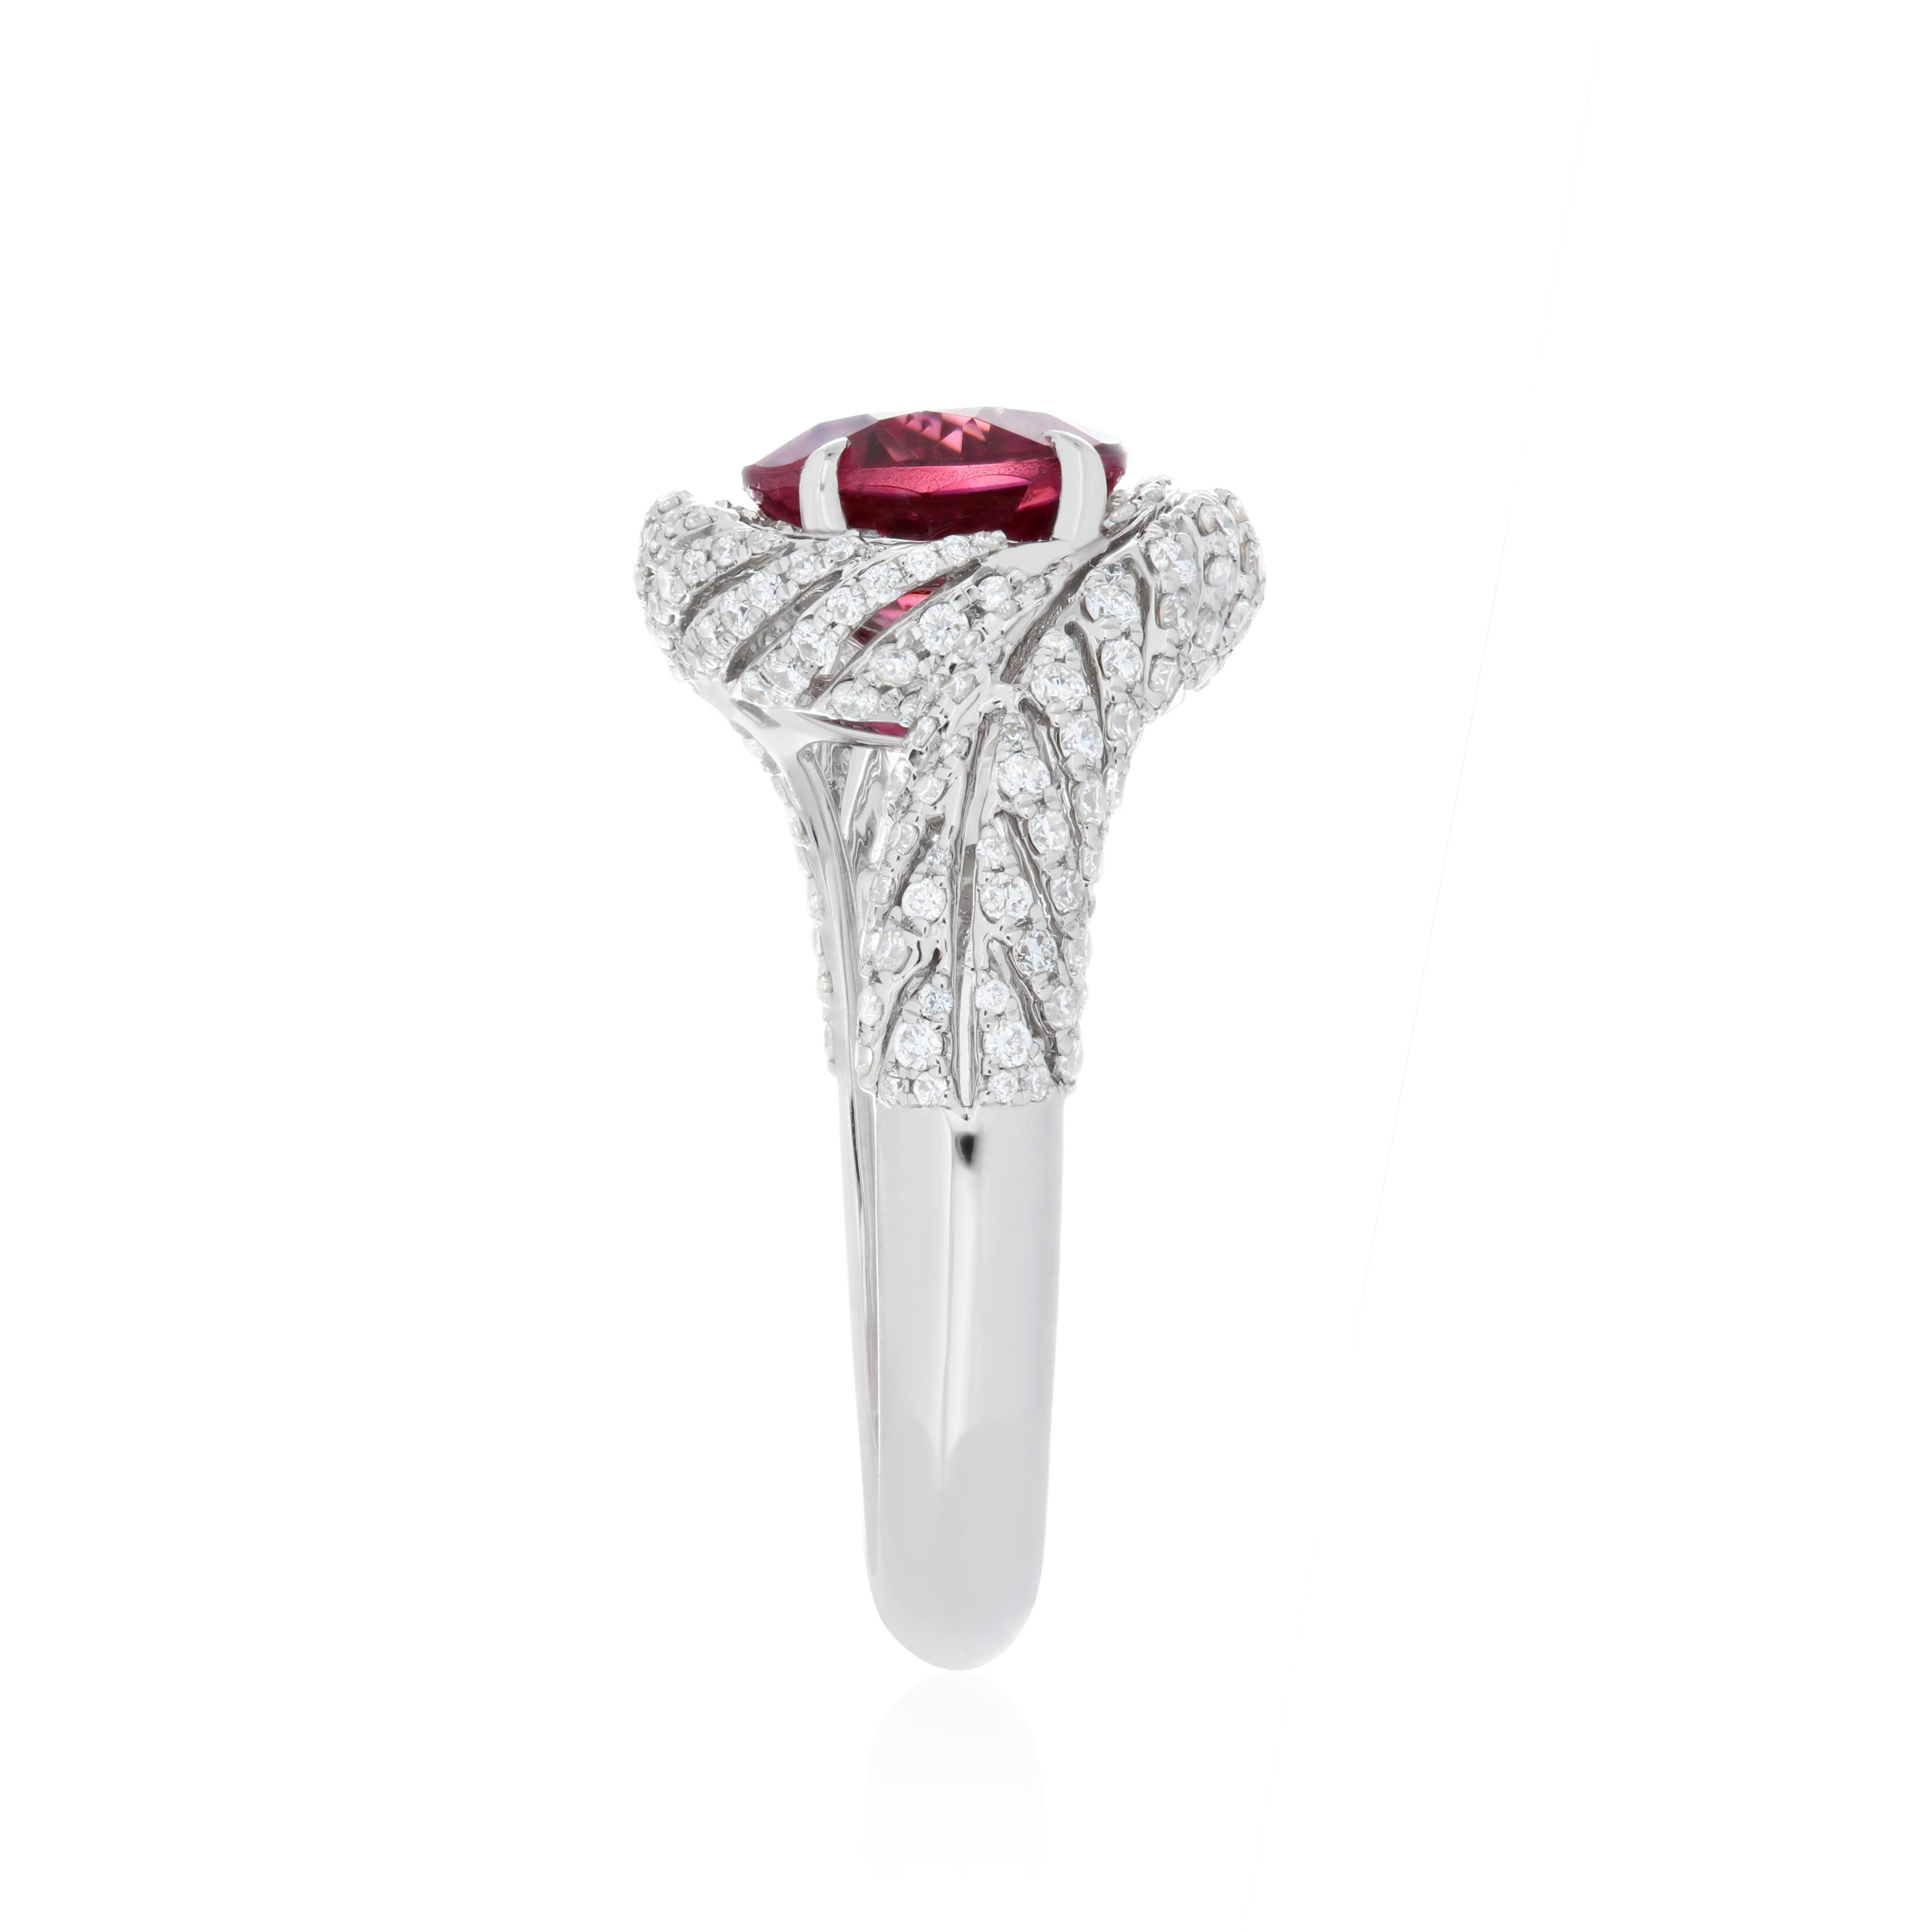 Women's 3.2 Carat Rubellite and Diamond Studded Ring in 18K White Gold Ring For Sale